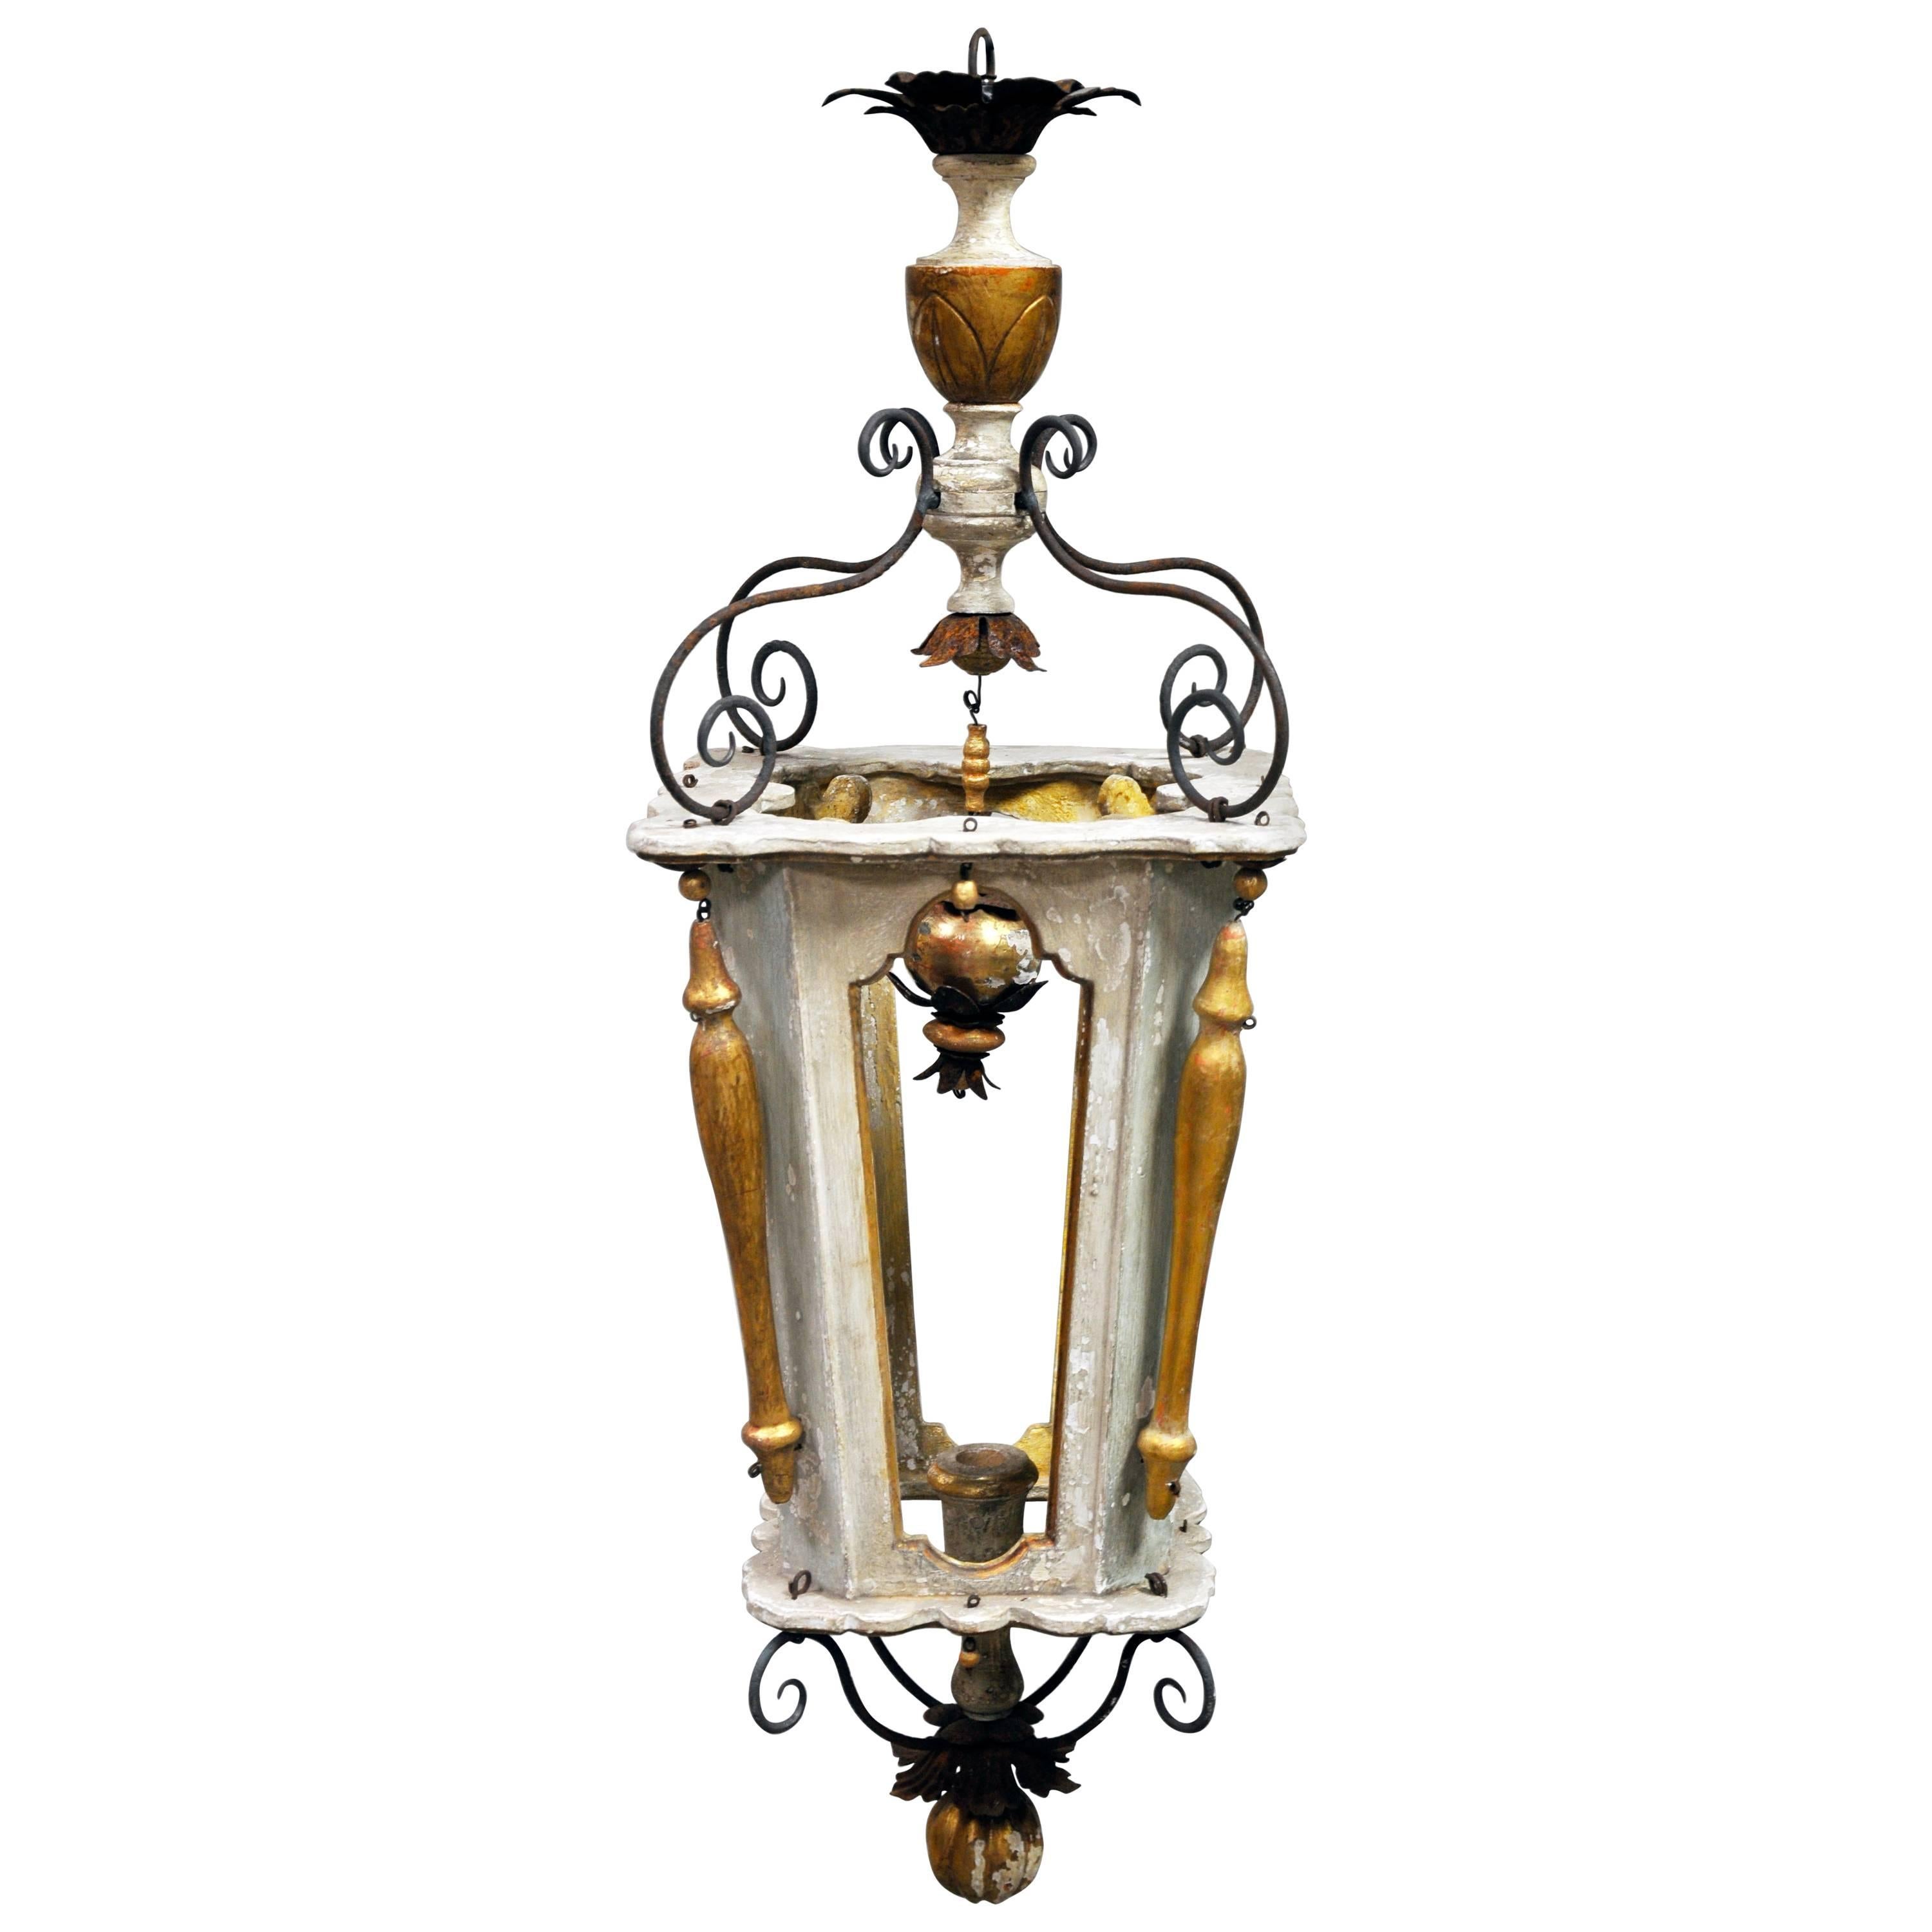 Custom French Lantern with Polychromed Wood and Old Elements